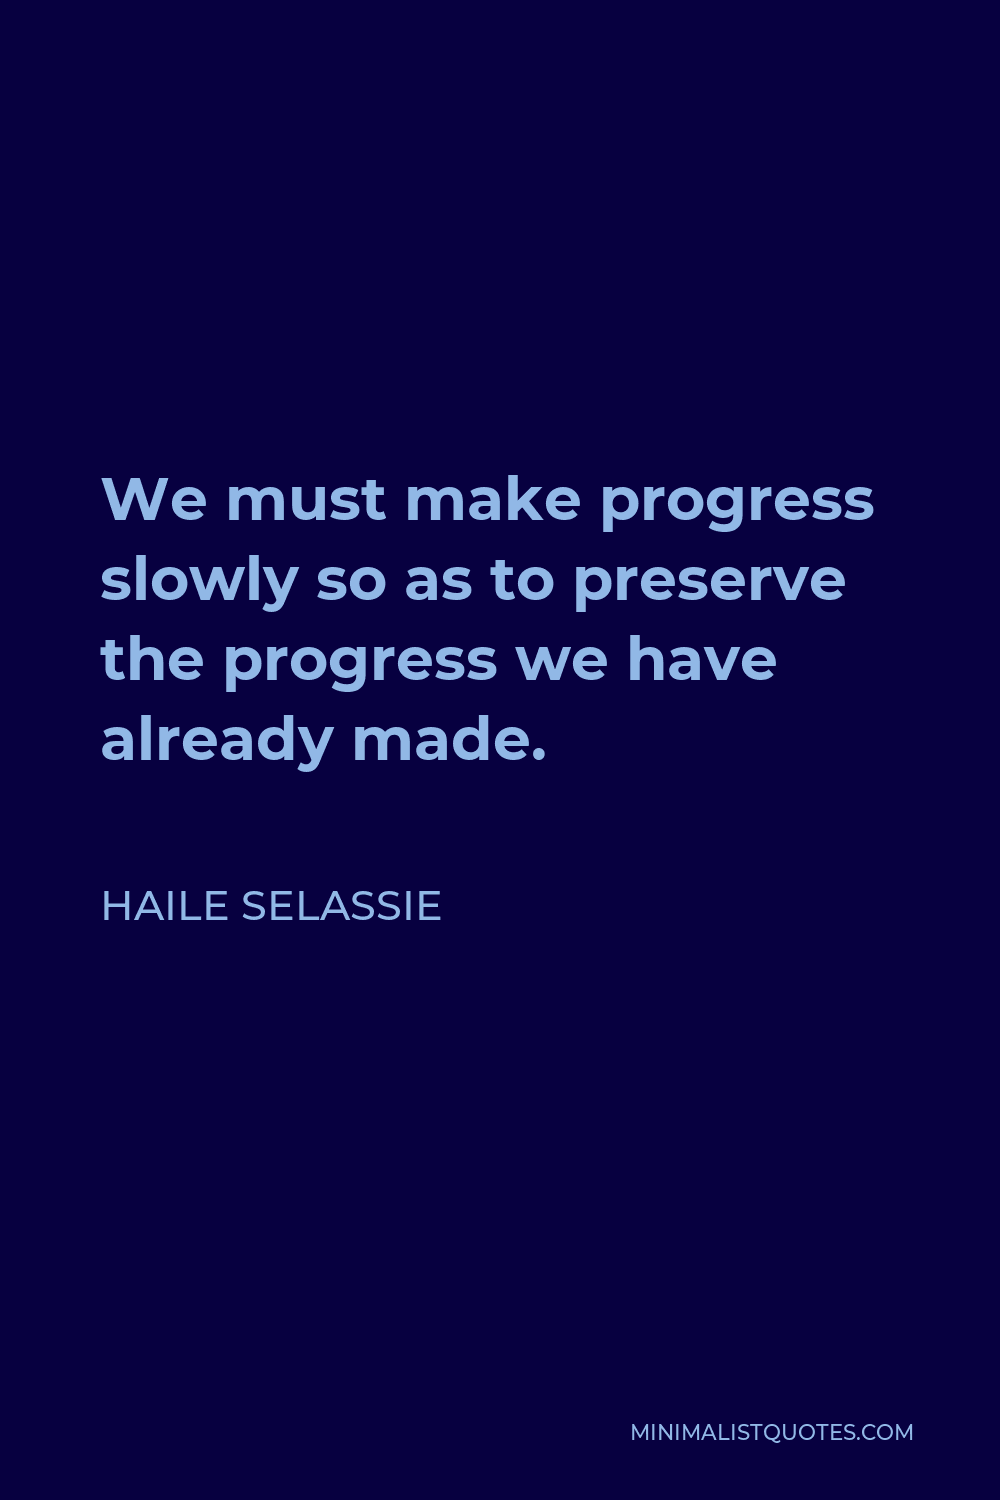 Haile Selassie Quote - We must make progress slowly so as to preserve the progress we have already made.